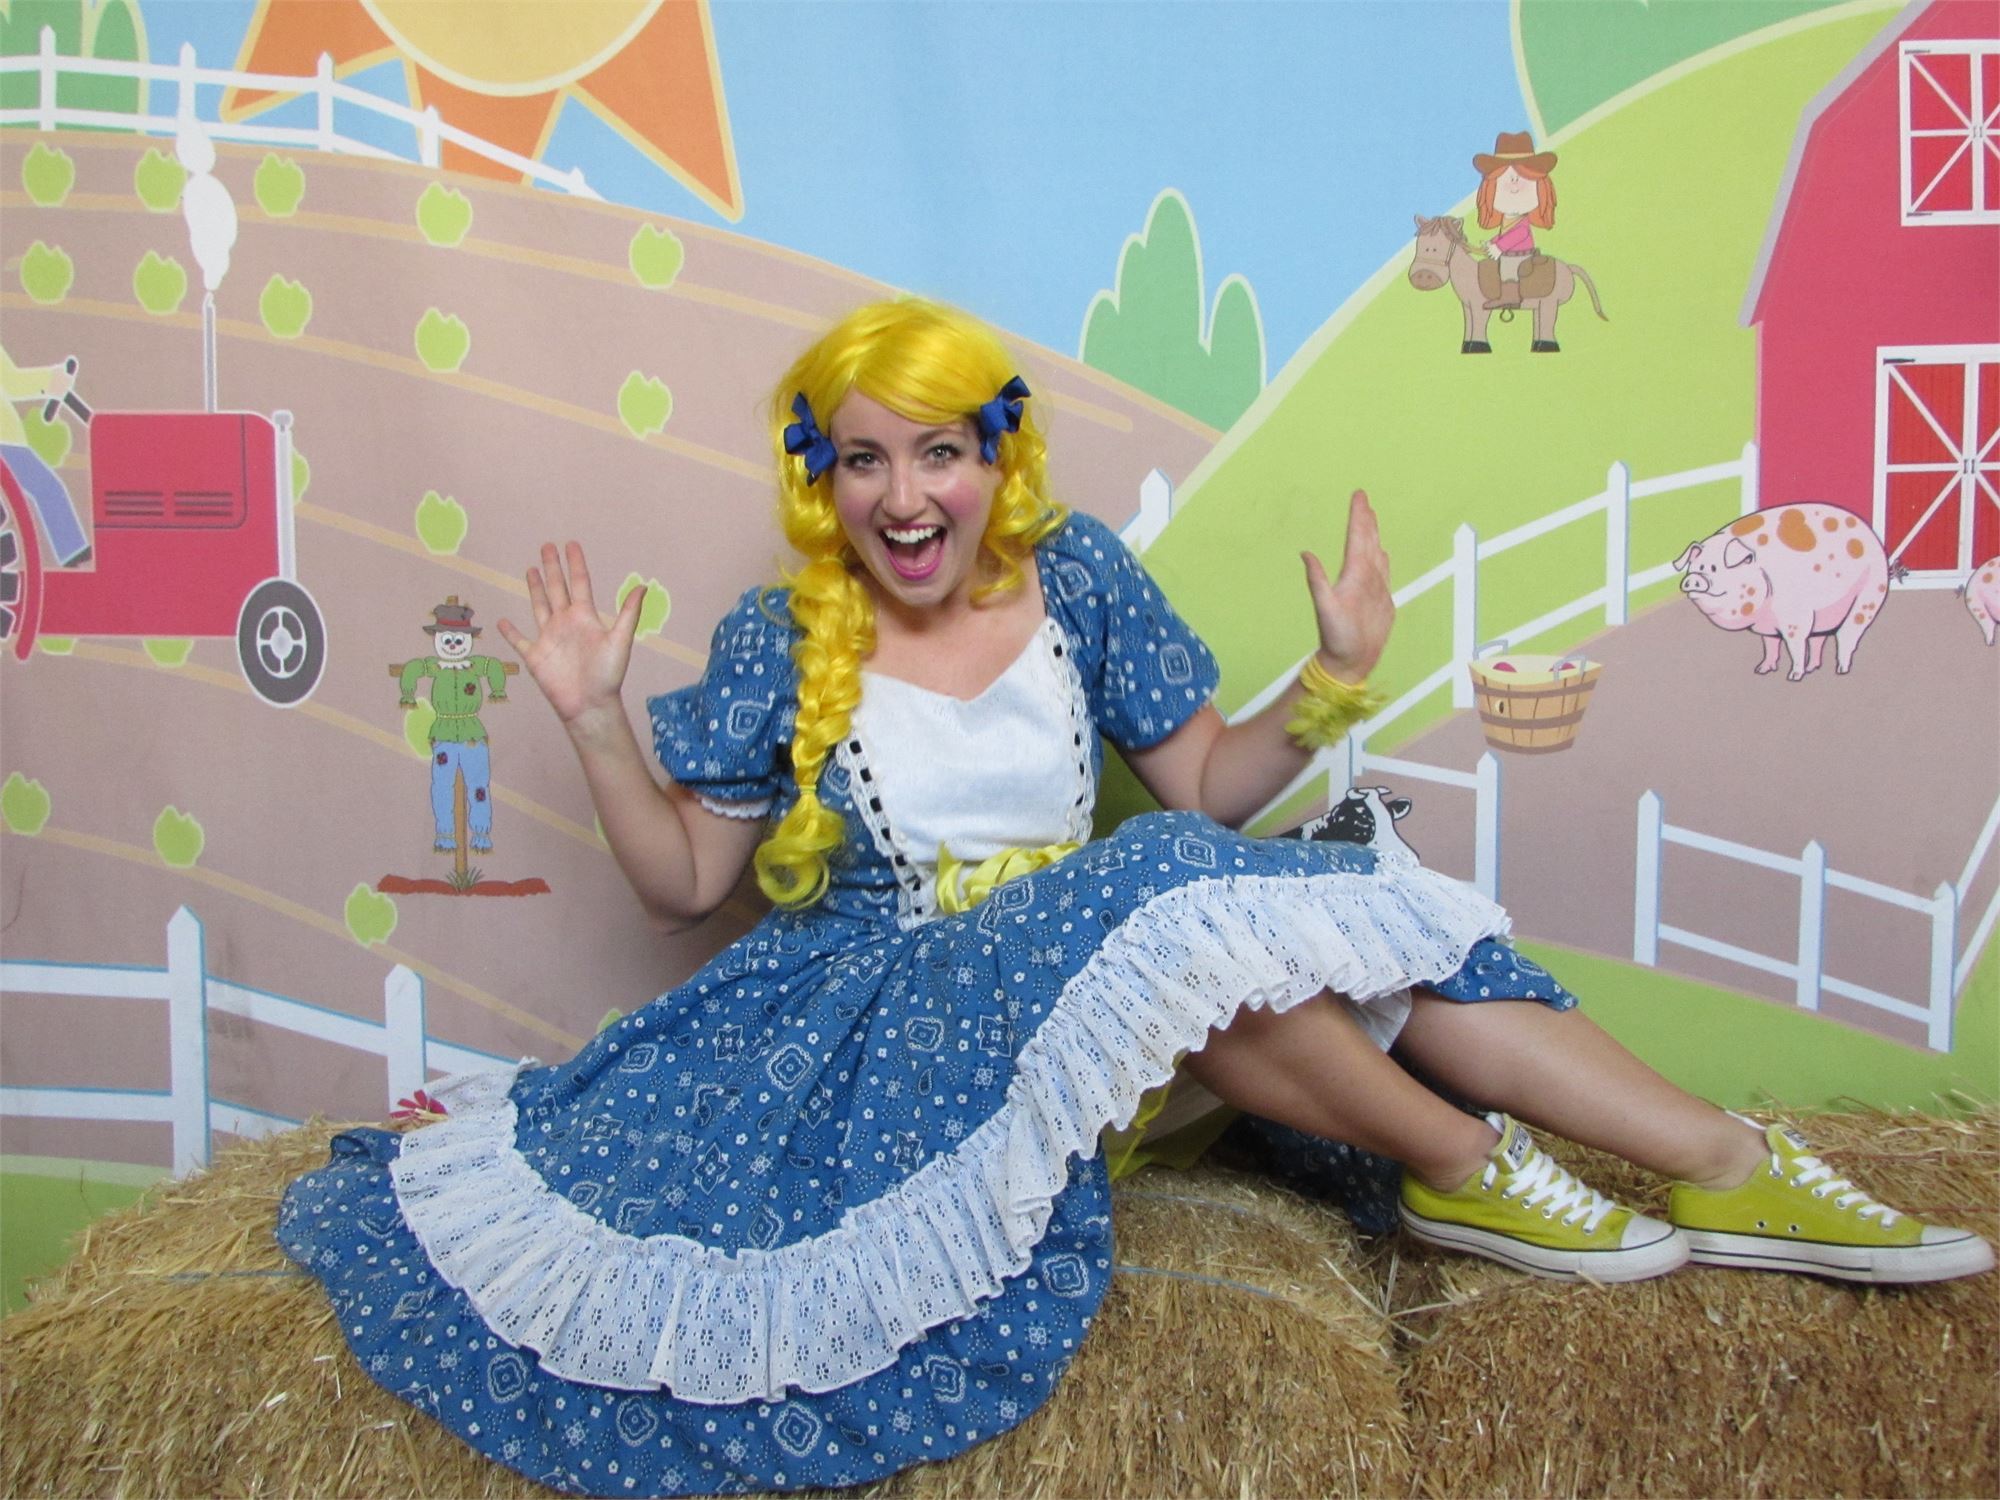 A young woman wearing a long yellow wig and a blue and white dress sitting on a bale of hay.